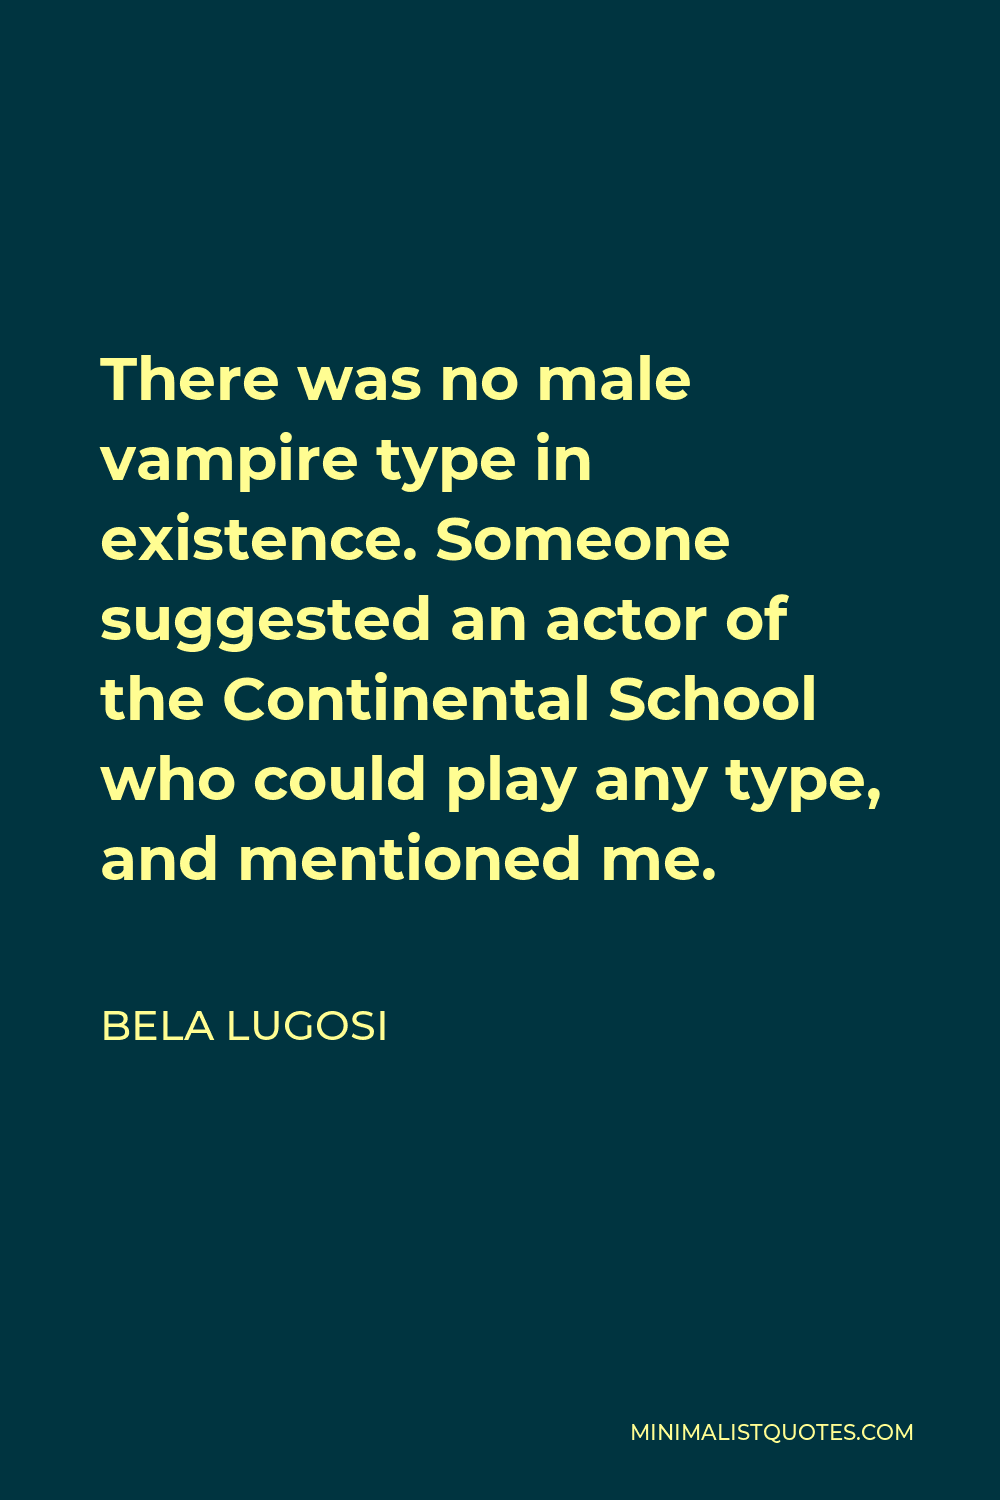 Bela Lugosi Quote - There was no male vampire type in existence. Someone suggested an actor of the Continental School who could play any type, and mentioned me.